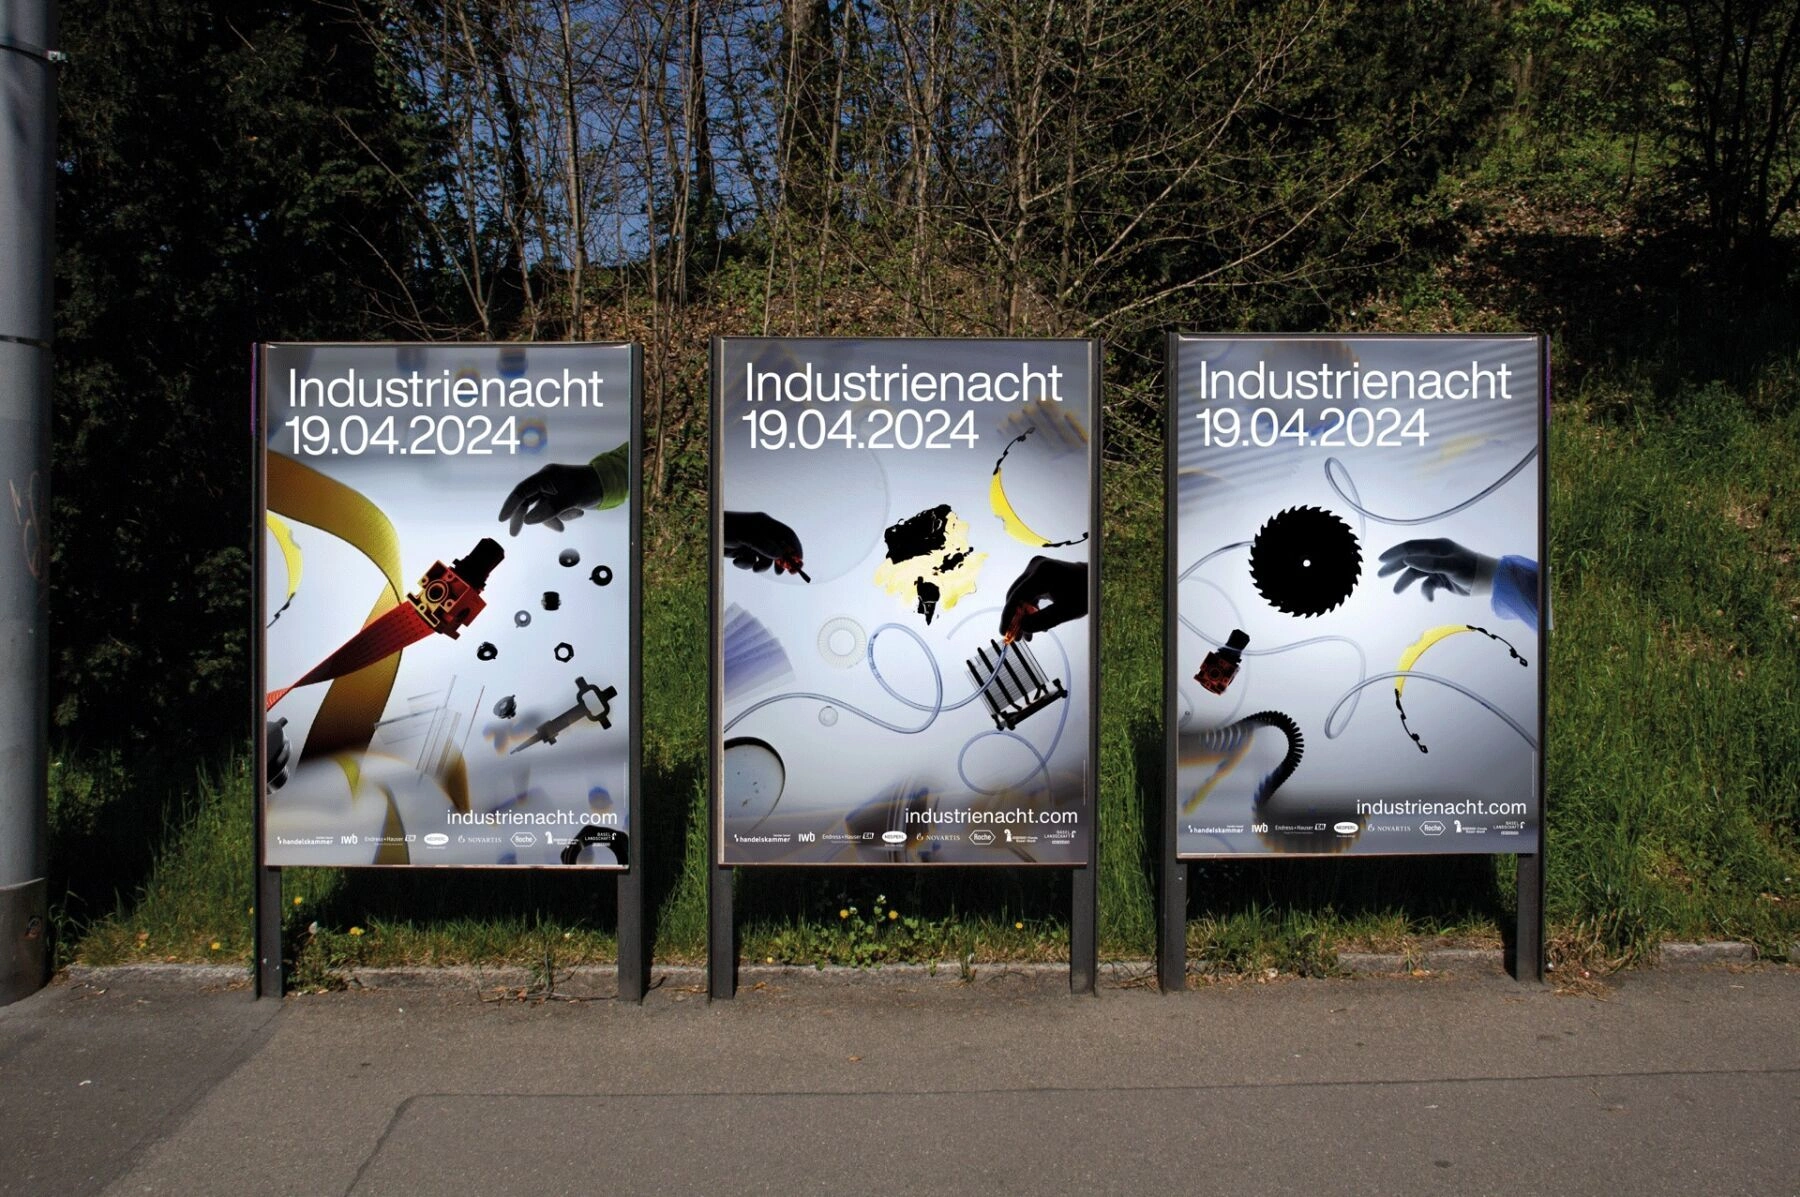 Industrienacht Basel: Neoperl is there